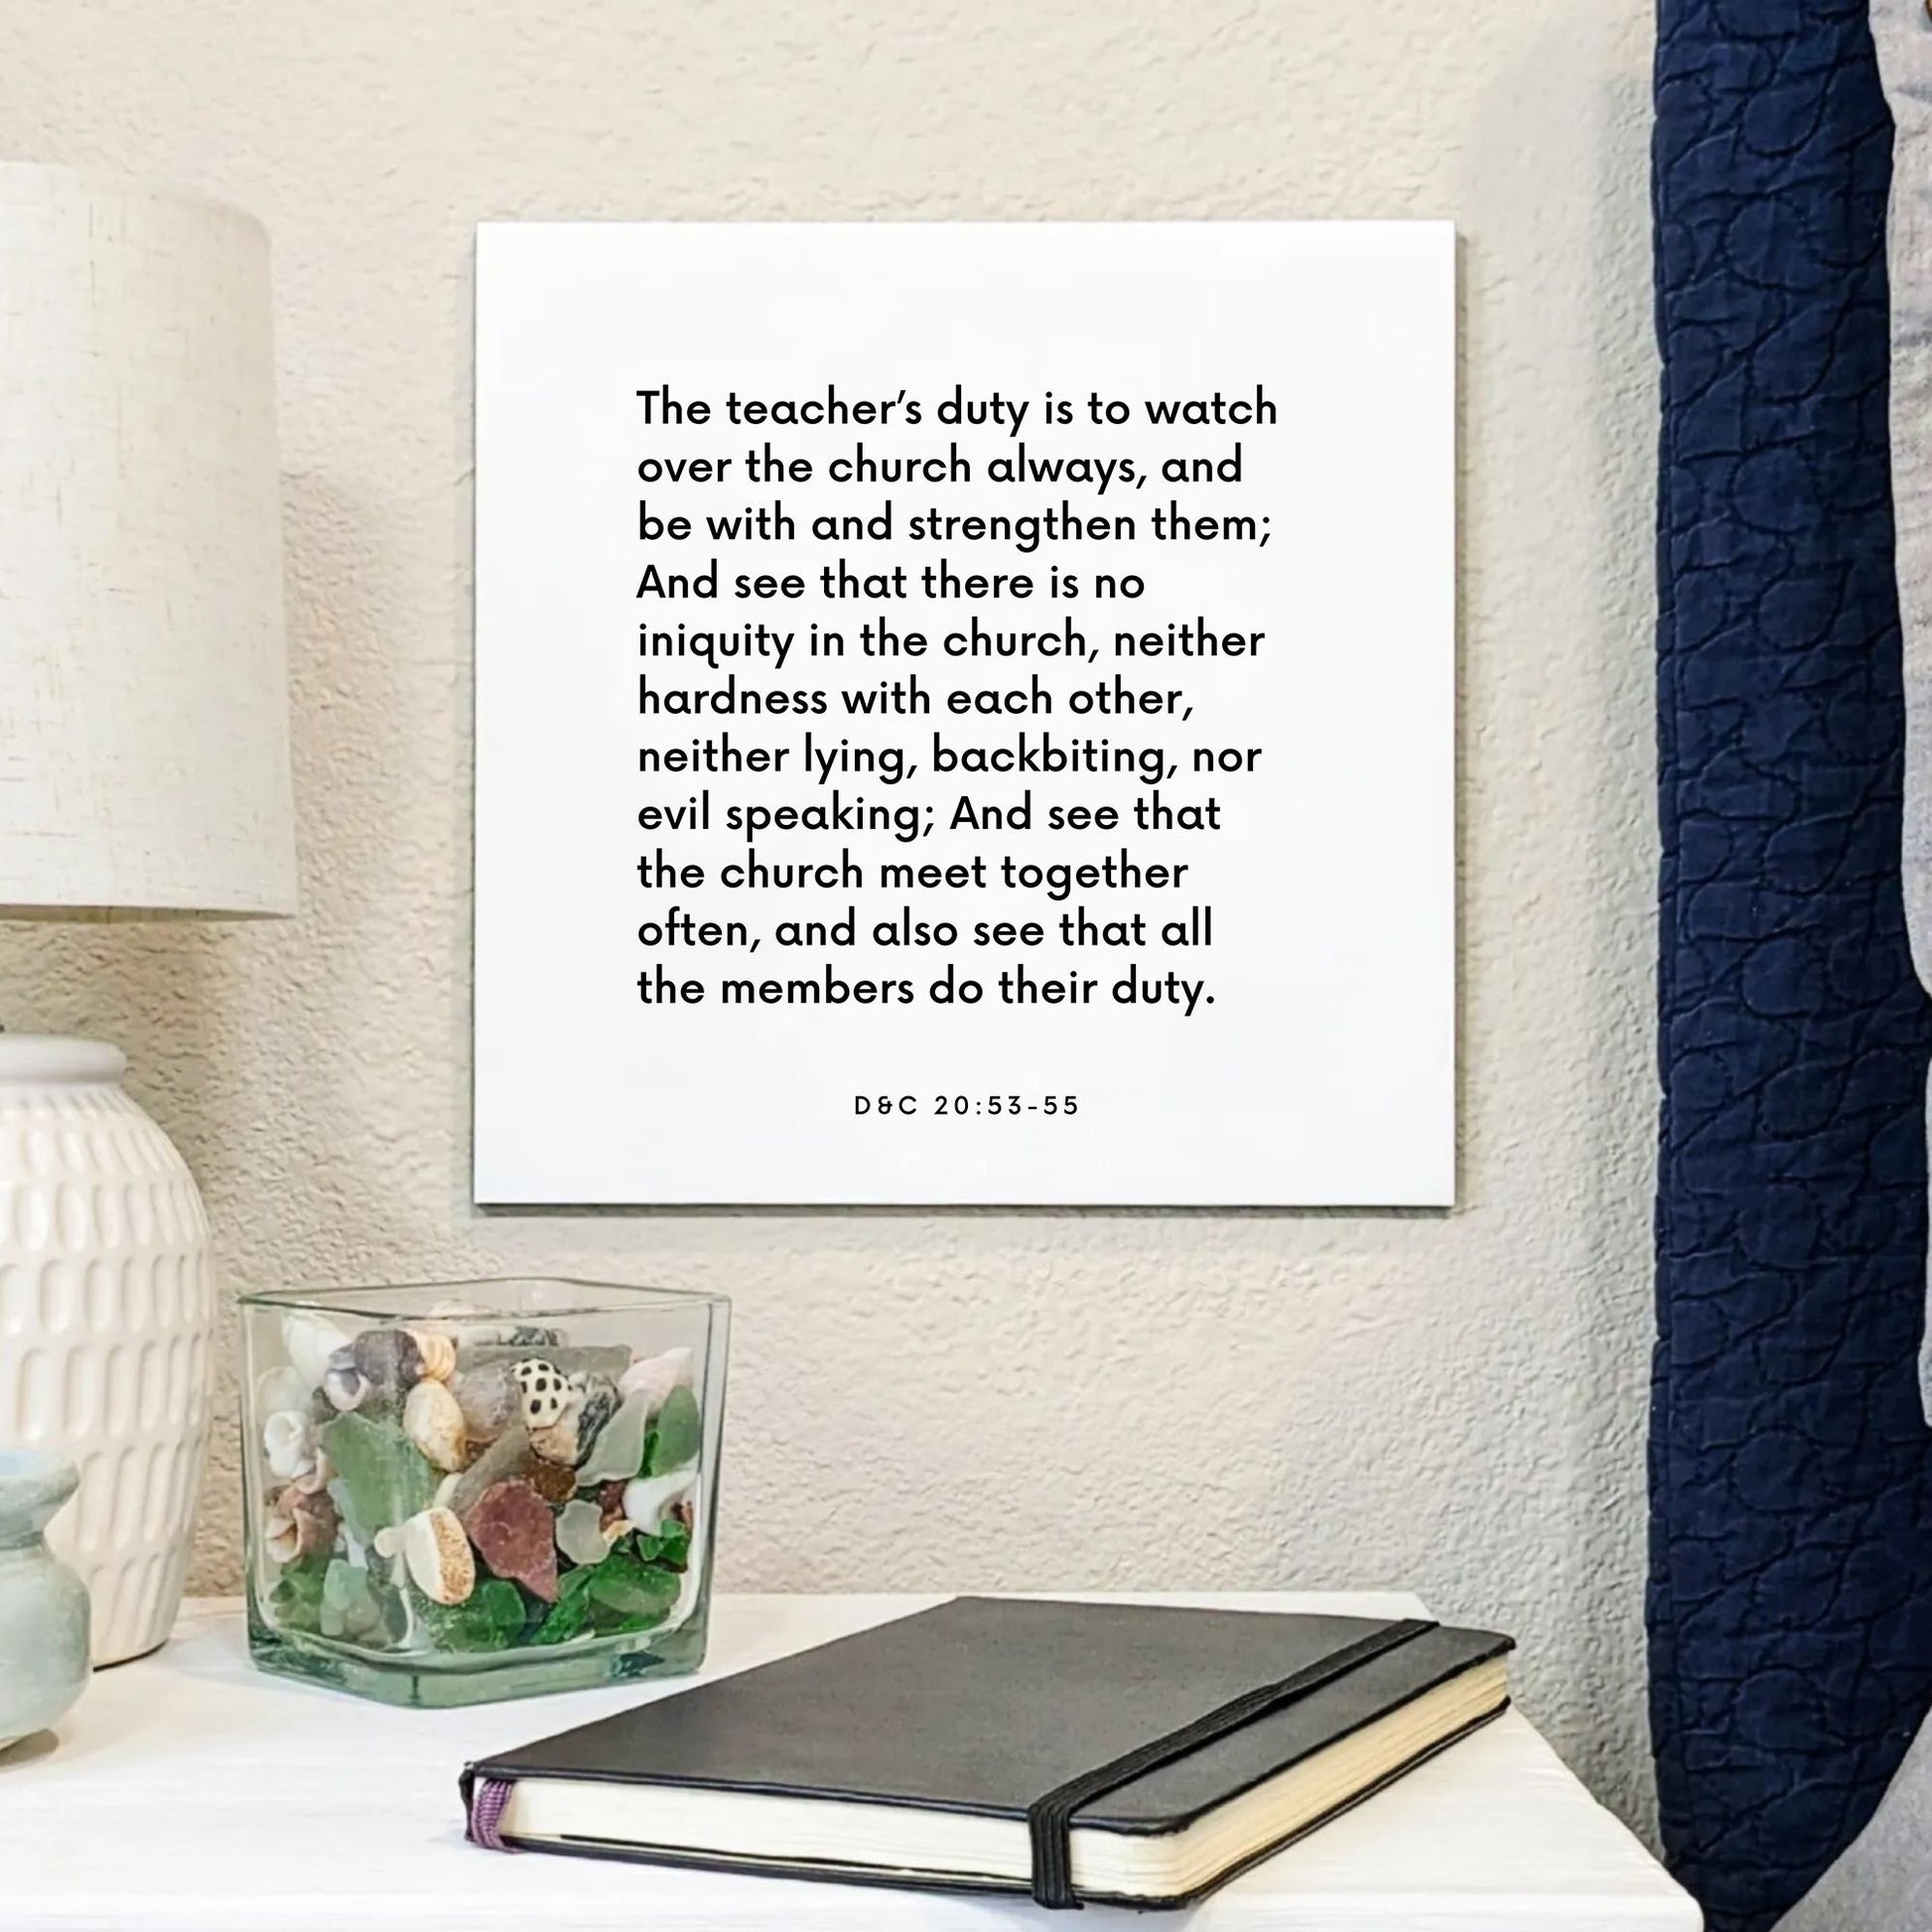 Bedside mouting of the scripture tile for D&C 20:53-55 - "The duties of a Teacher or Deacon"